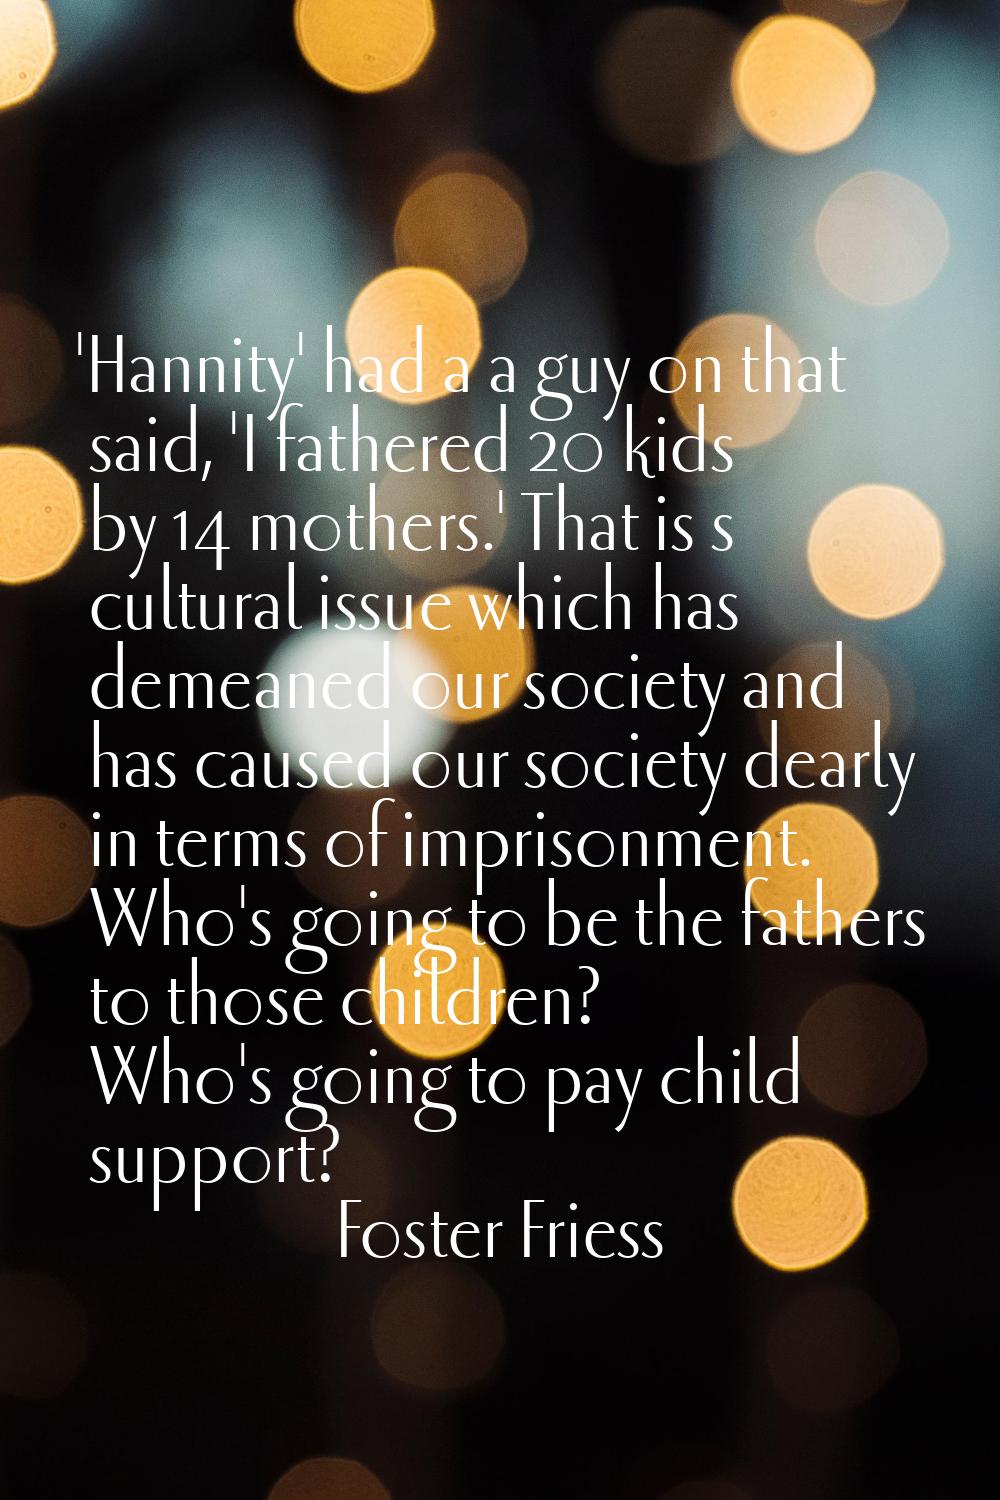 'Hannity' had a a guy on that said, 'I fathered 20 kids by 14 mothers.' That is s cultural issue wh